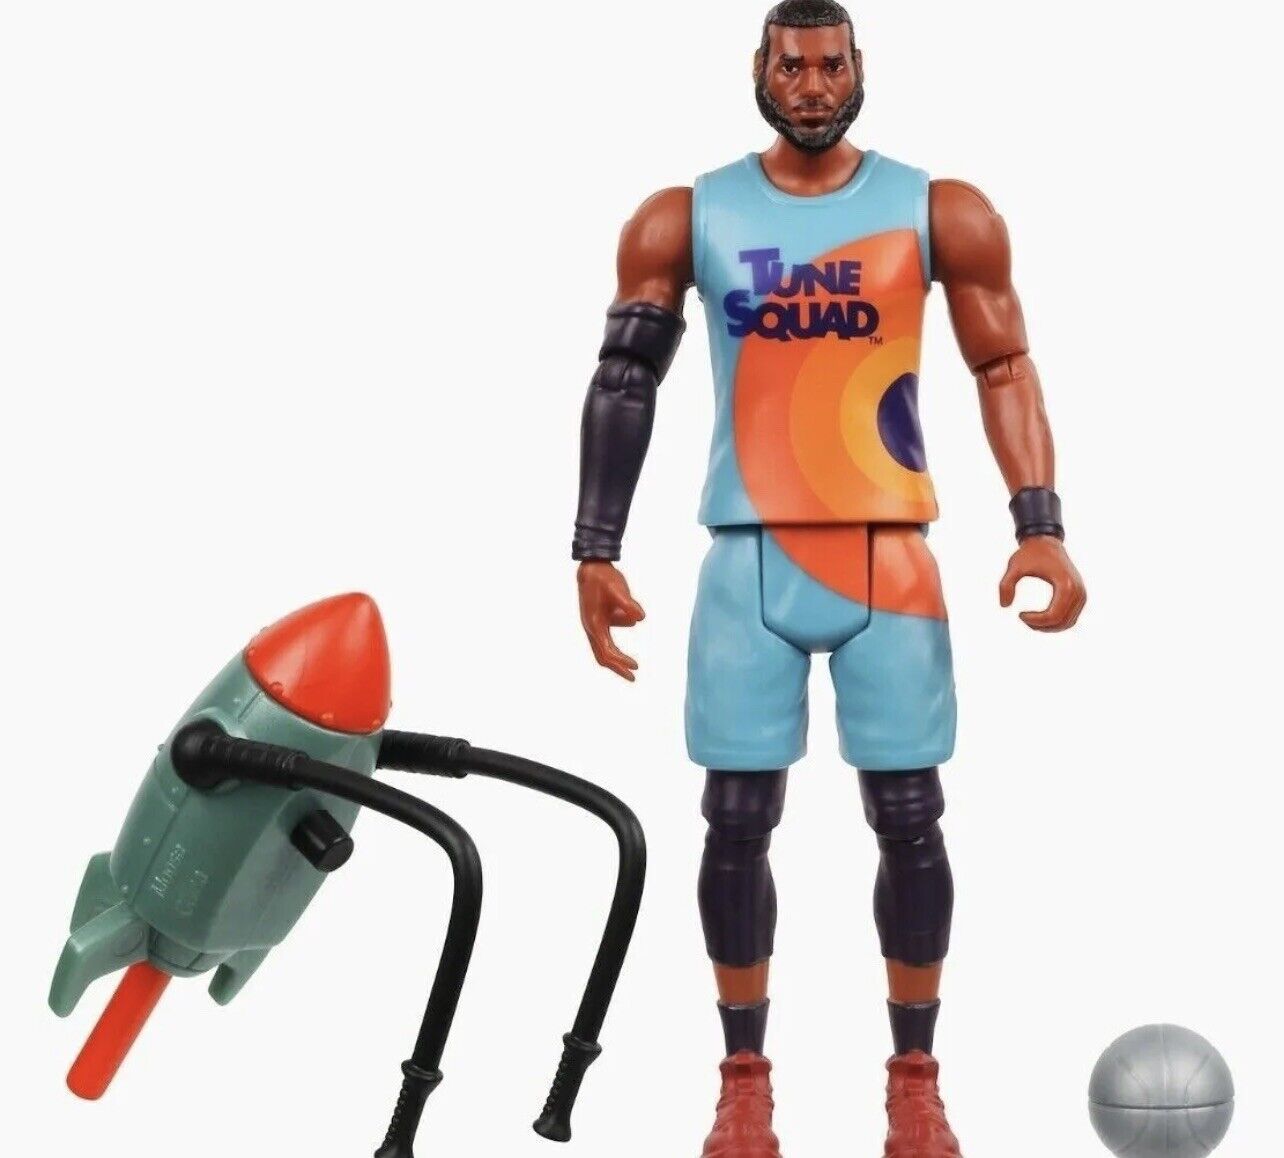 Space Jam A New Legacy 5" Lebron James Action Figure with Acme Rocket Pack 4000